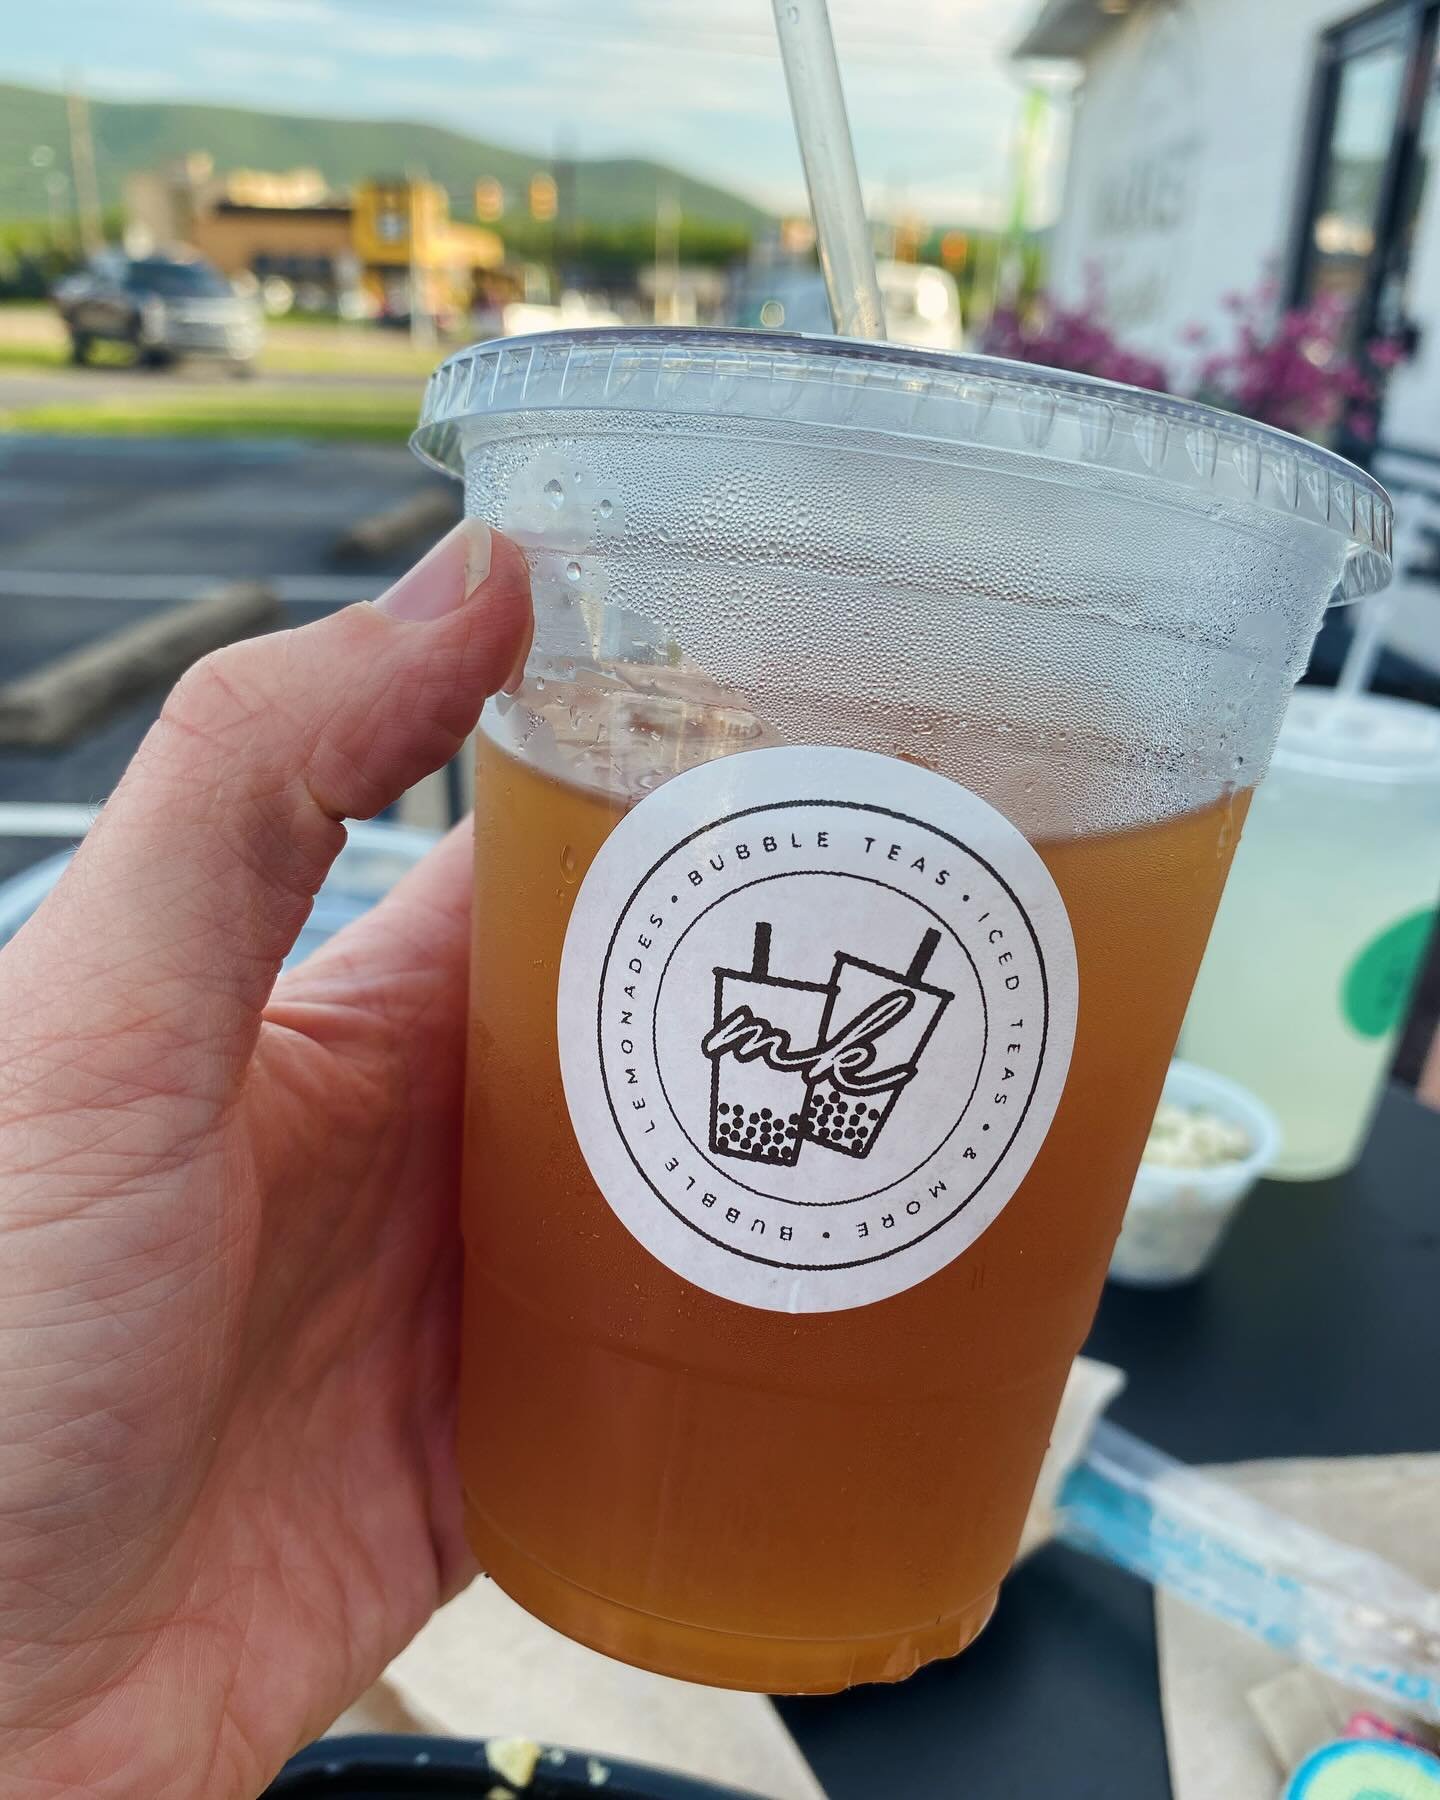 🥤Stopped by @dwmarkethouse earlier this week and picked up a peach tea from @mkbubbledrinks. Check out their page to see where you can find them next! They also added a gift card to the Memorial Day Weekend cooler giveaway at Don Waltman&rsquo;s. Yo